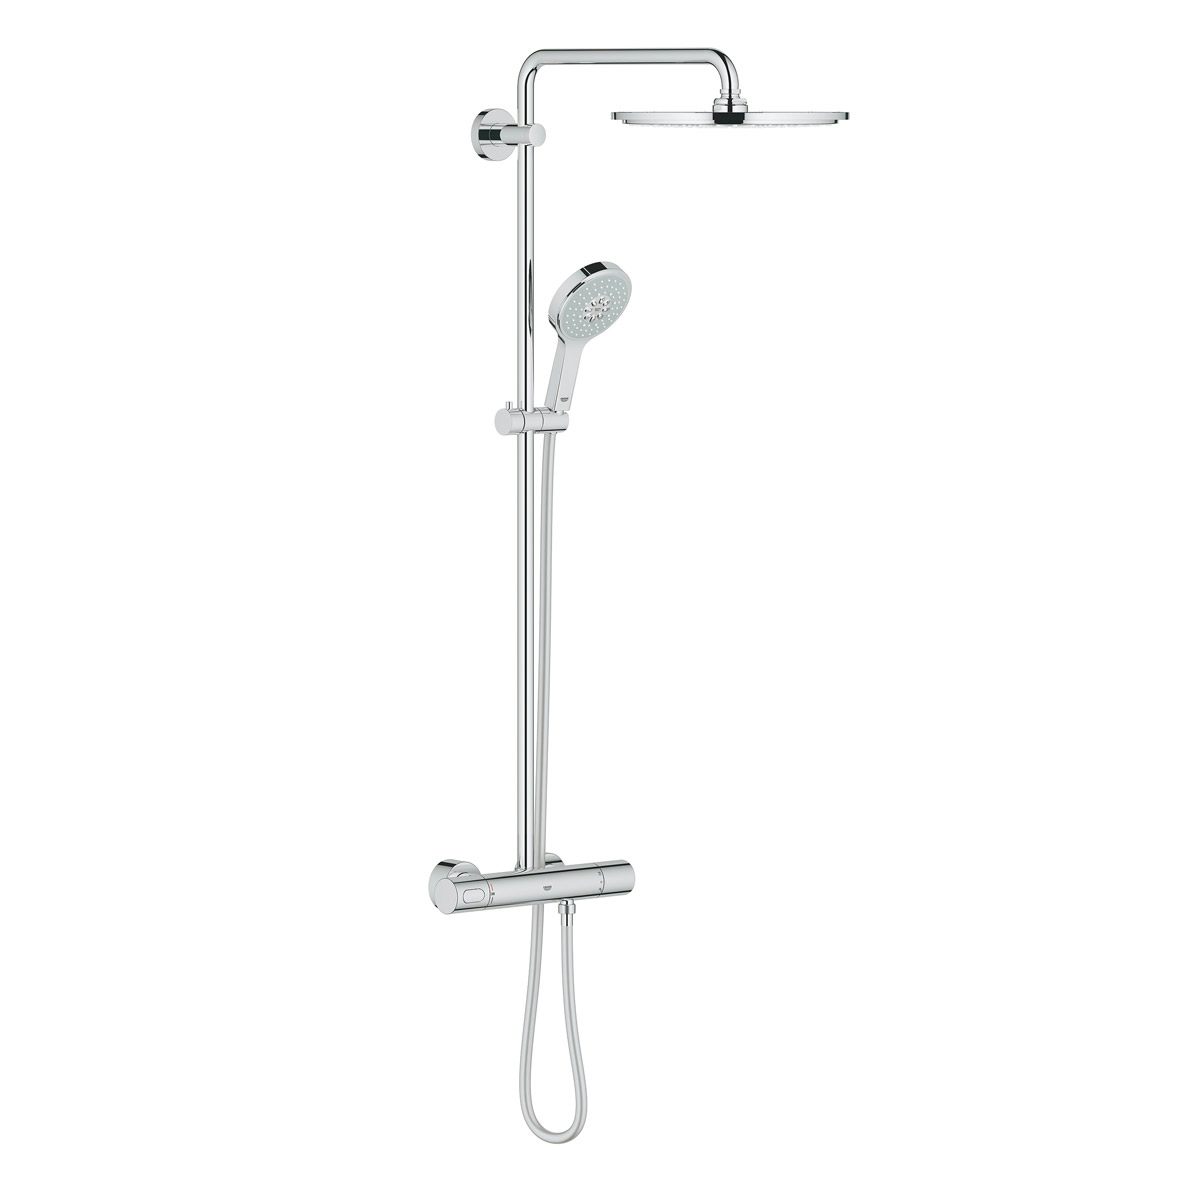 Grohe Rainshower 310 shower system with round handset